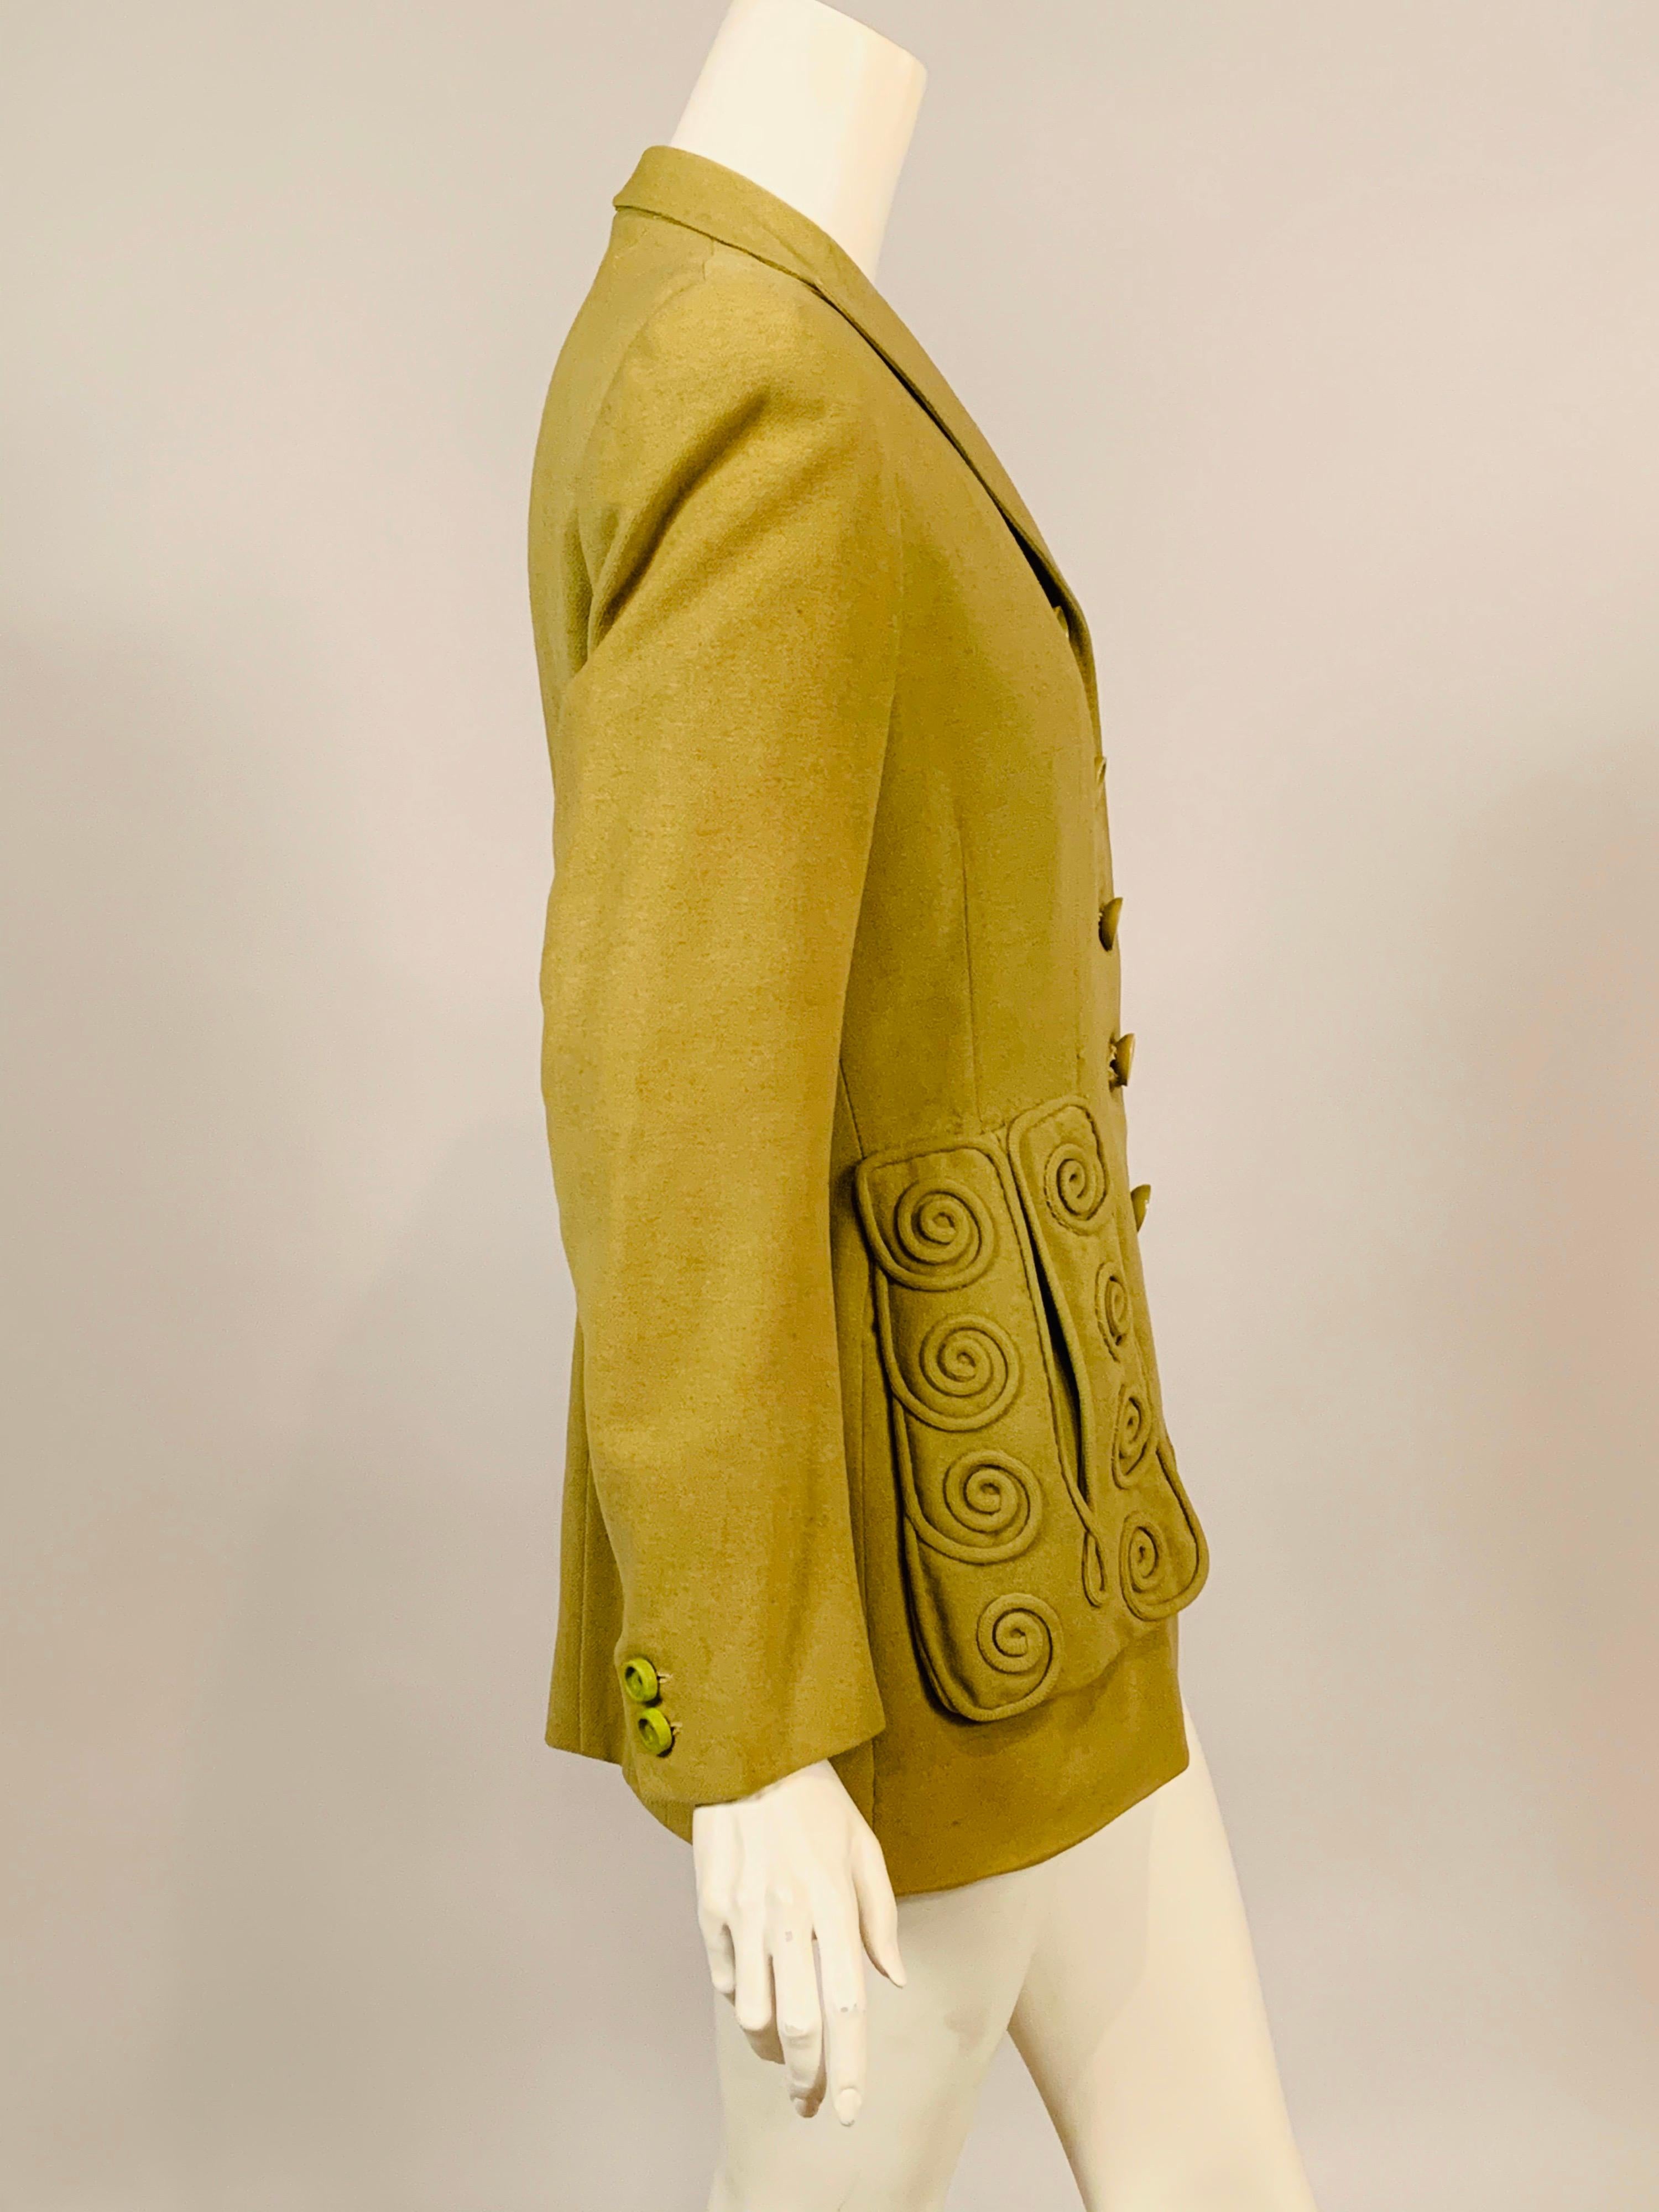 Women's Lanvin Haute Couture May 1944 Spring Green Wool Jacket for Collector or Designer